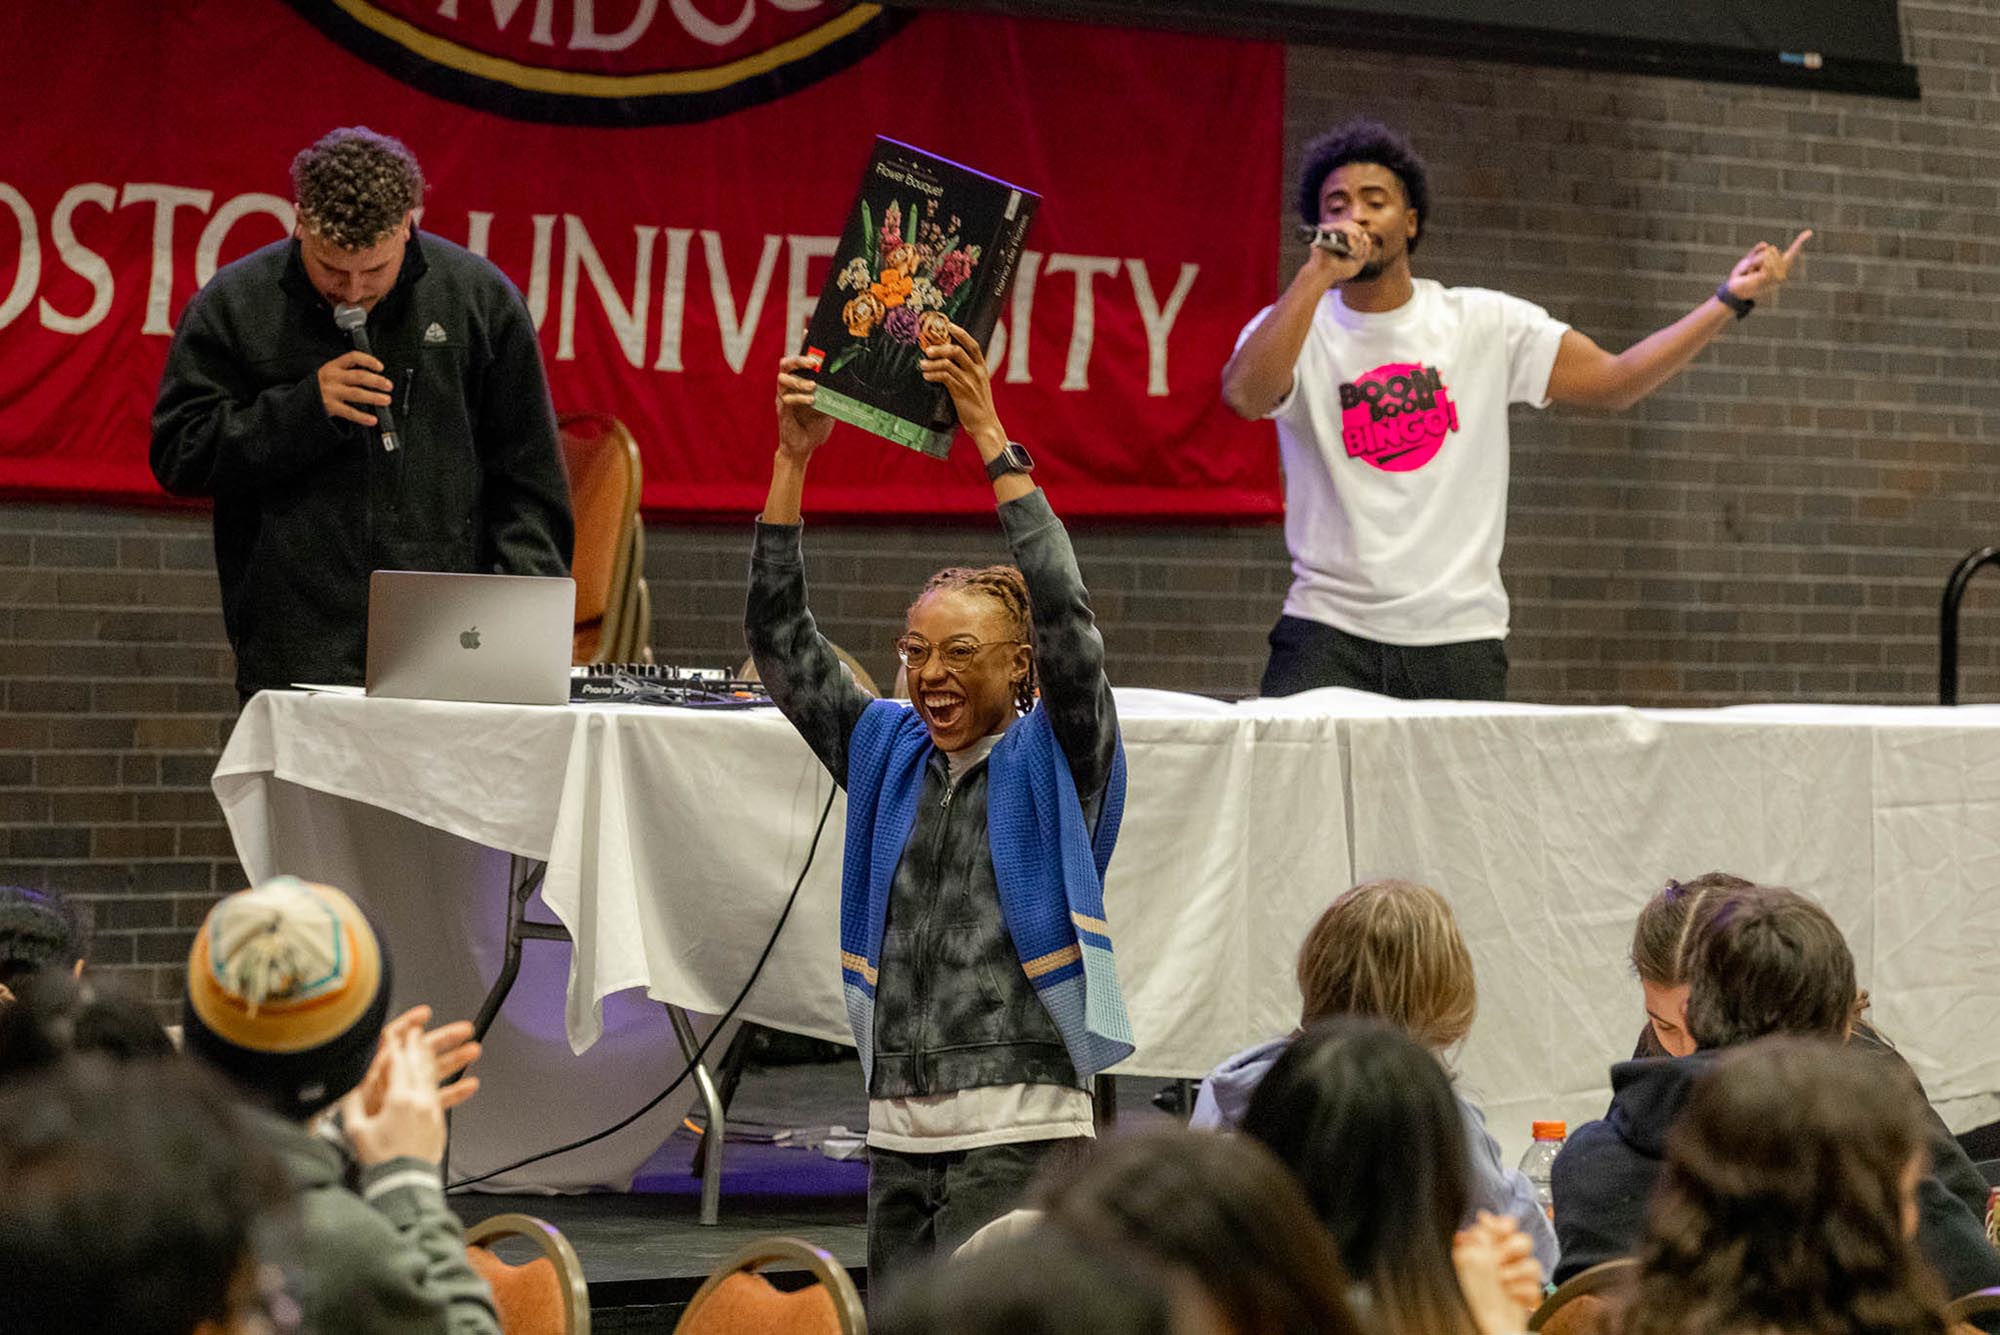 Photo: Raquel Joseph, a young Black woman wearing glasses and a grey-themed tye-dye jumpsuit, laughs and holds up a large Lego flower set in glee. A DJ wearing a shirt that reads "Boom boom bingo!" speaks into a microphone at a white table behind her.